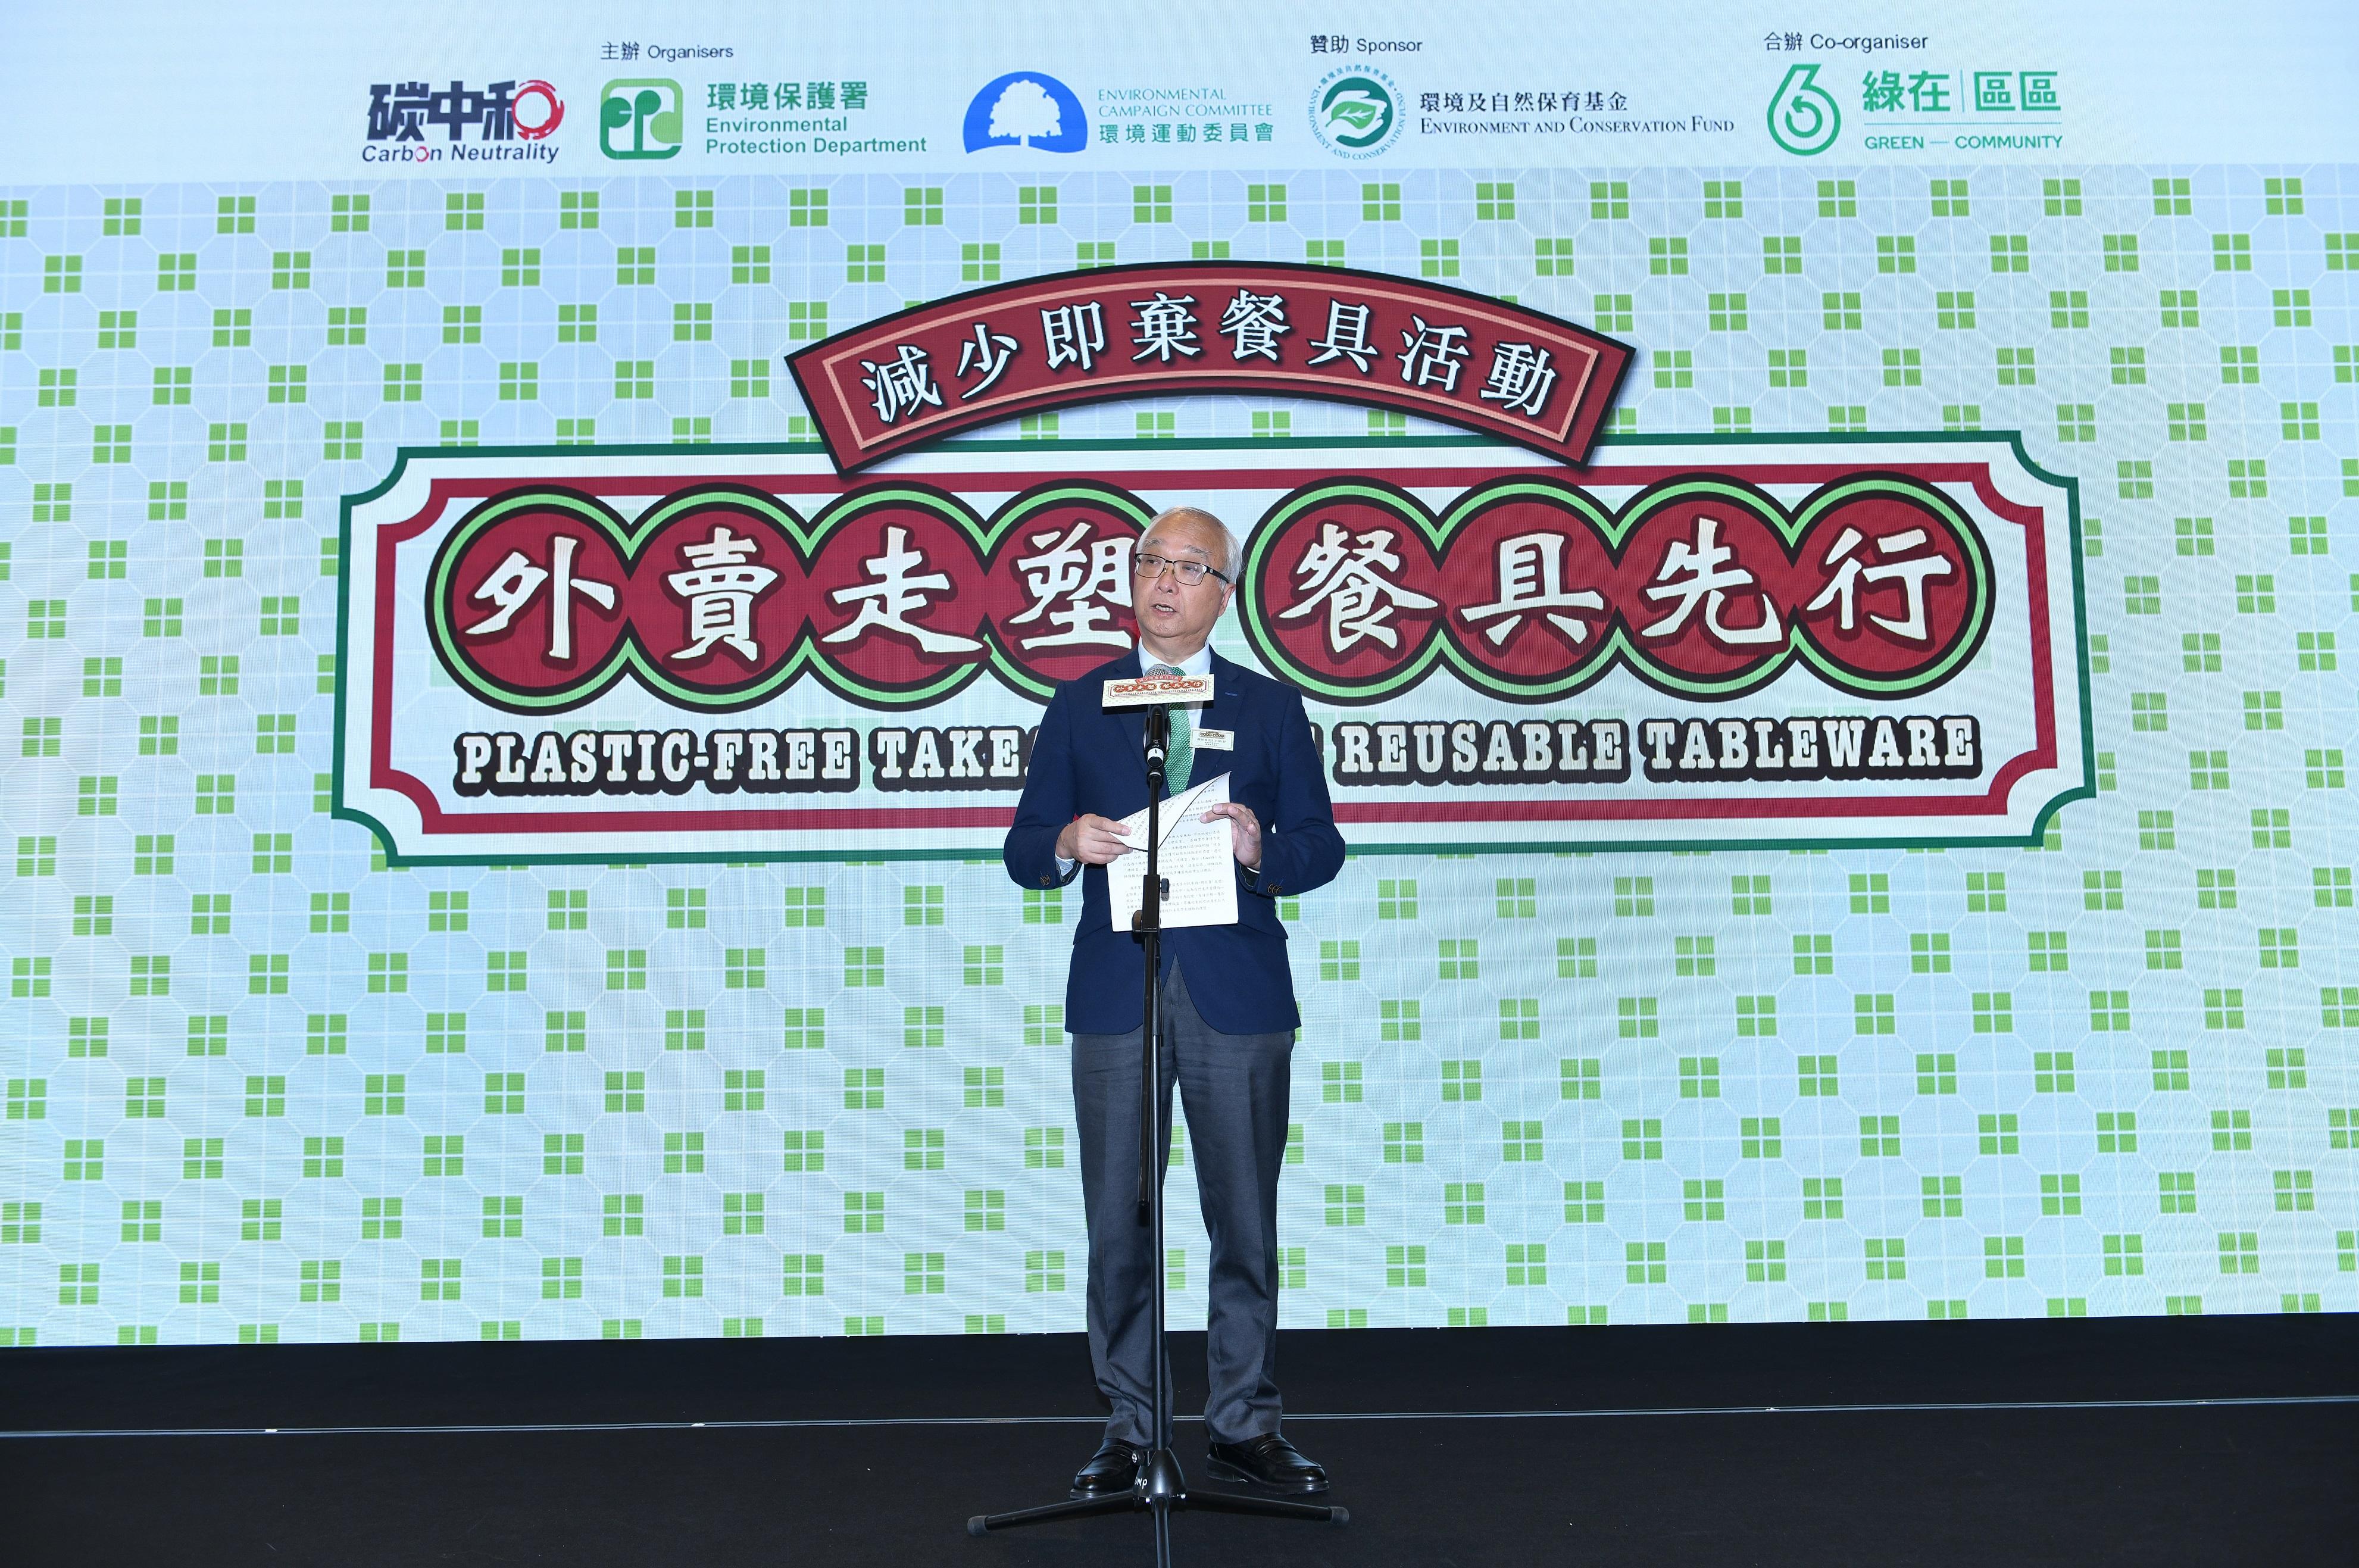 The Environmental Protection Department and the Environmental Campaign Committee officially kicked off the third "Plastic-Free Takeaway, Use Reusable Tableware" campaign today (November 17). Photo shows the Secretary for the Environment and Ecology, Mr Tse Chin-wan, delivering a speech at the launching ceremony held at D·PARK in Tsuen Wan.